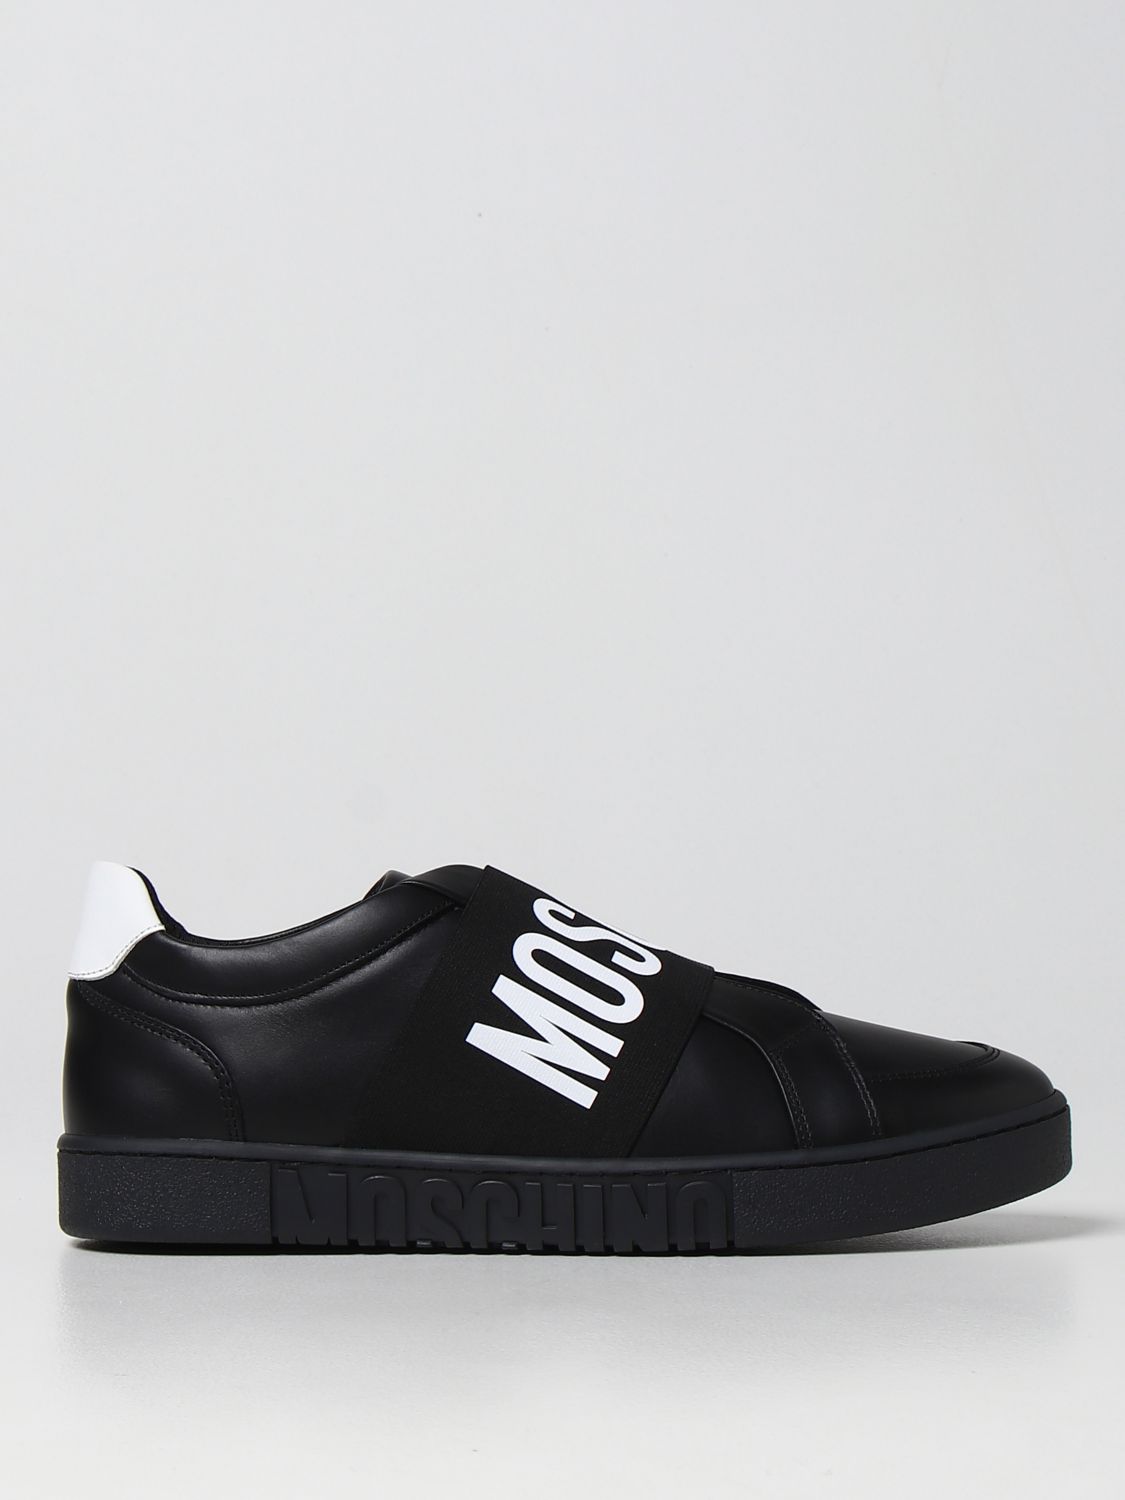 MOSCHINO COUTURE: leather sneakers - Black | MOSCHINO COUTURE sneakers ...